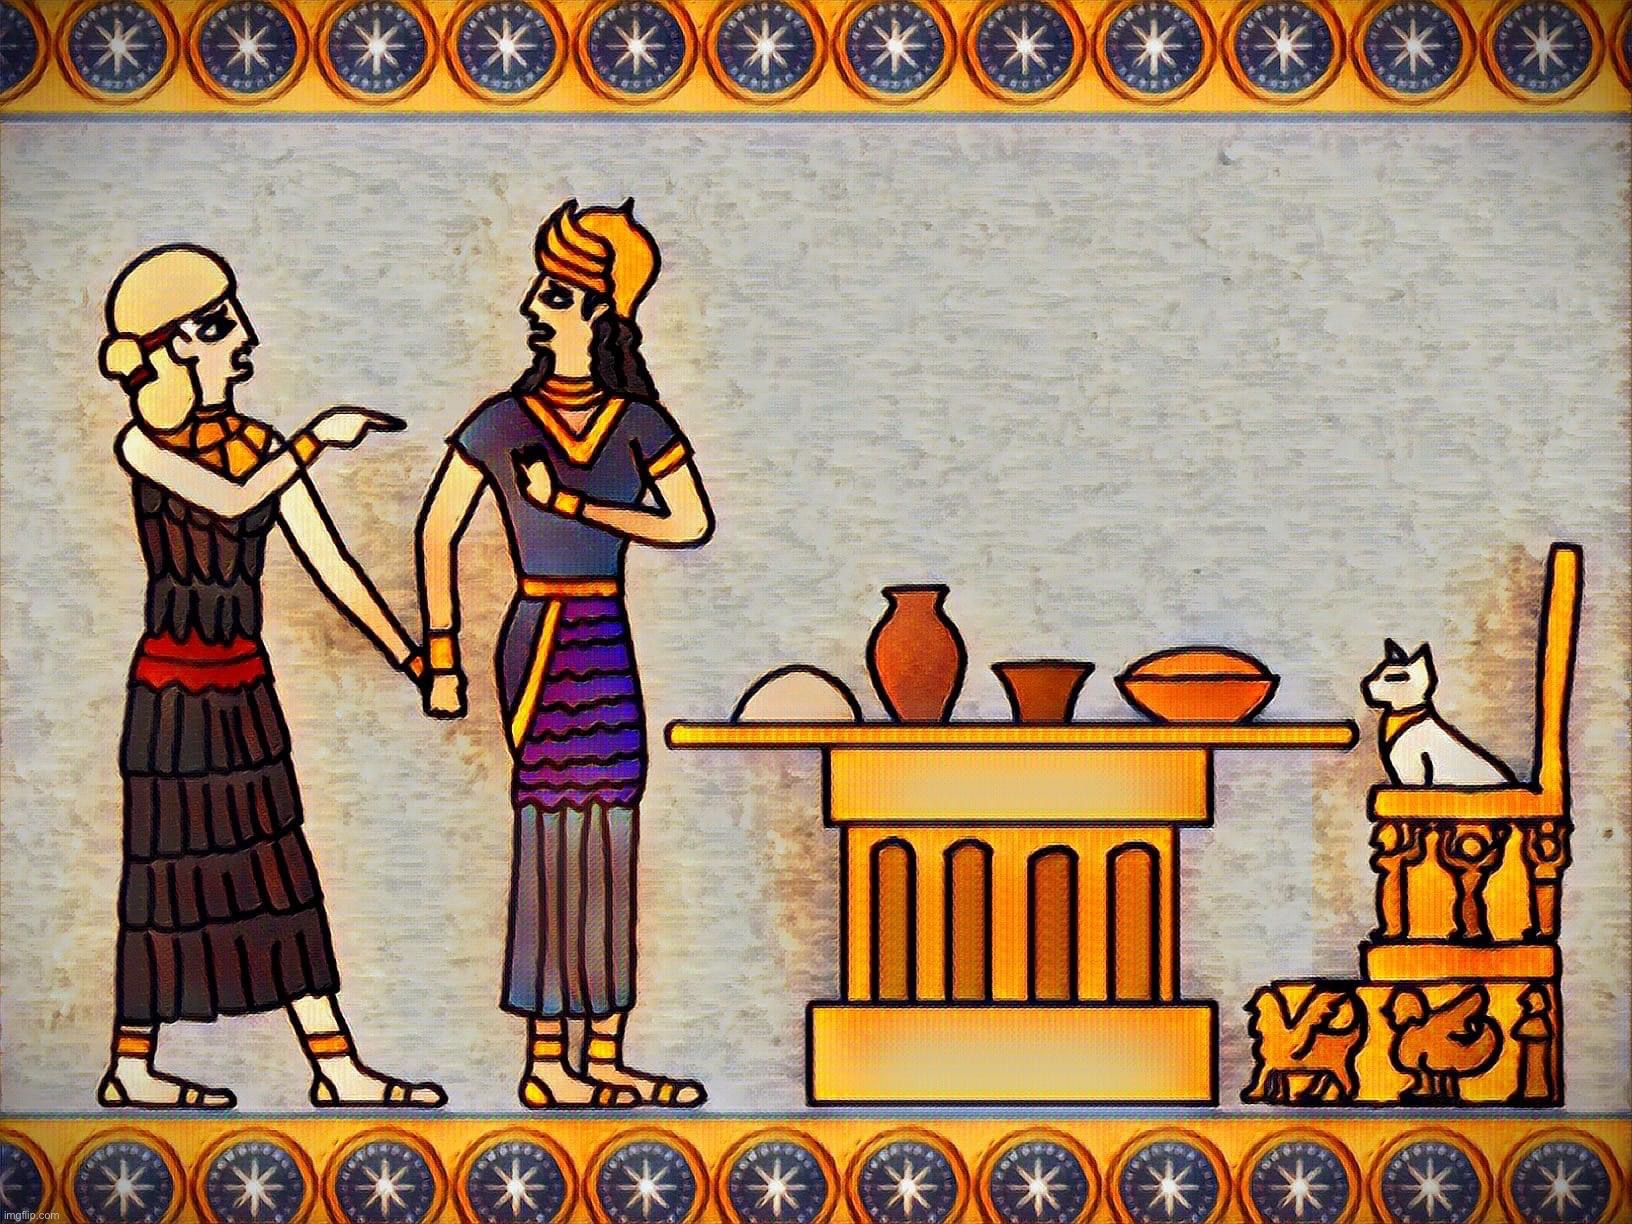 Sumerian Woman yelling at cat | image tagged in sumerian woman yelling at cat | made w/ Imgflip meme maker